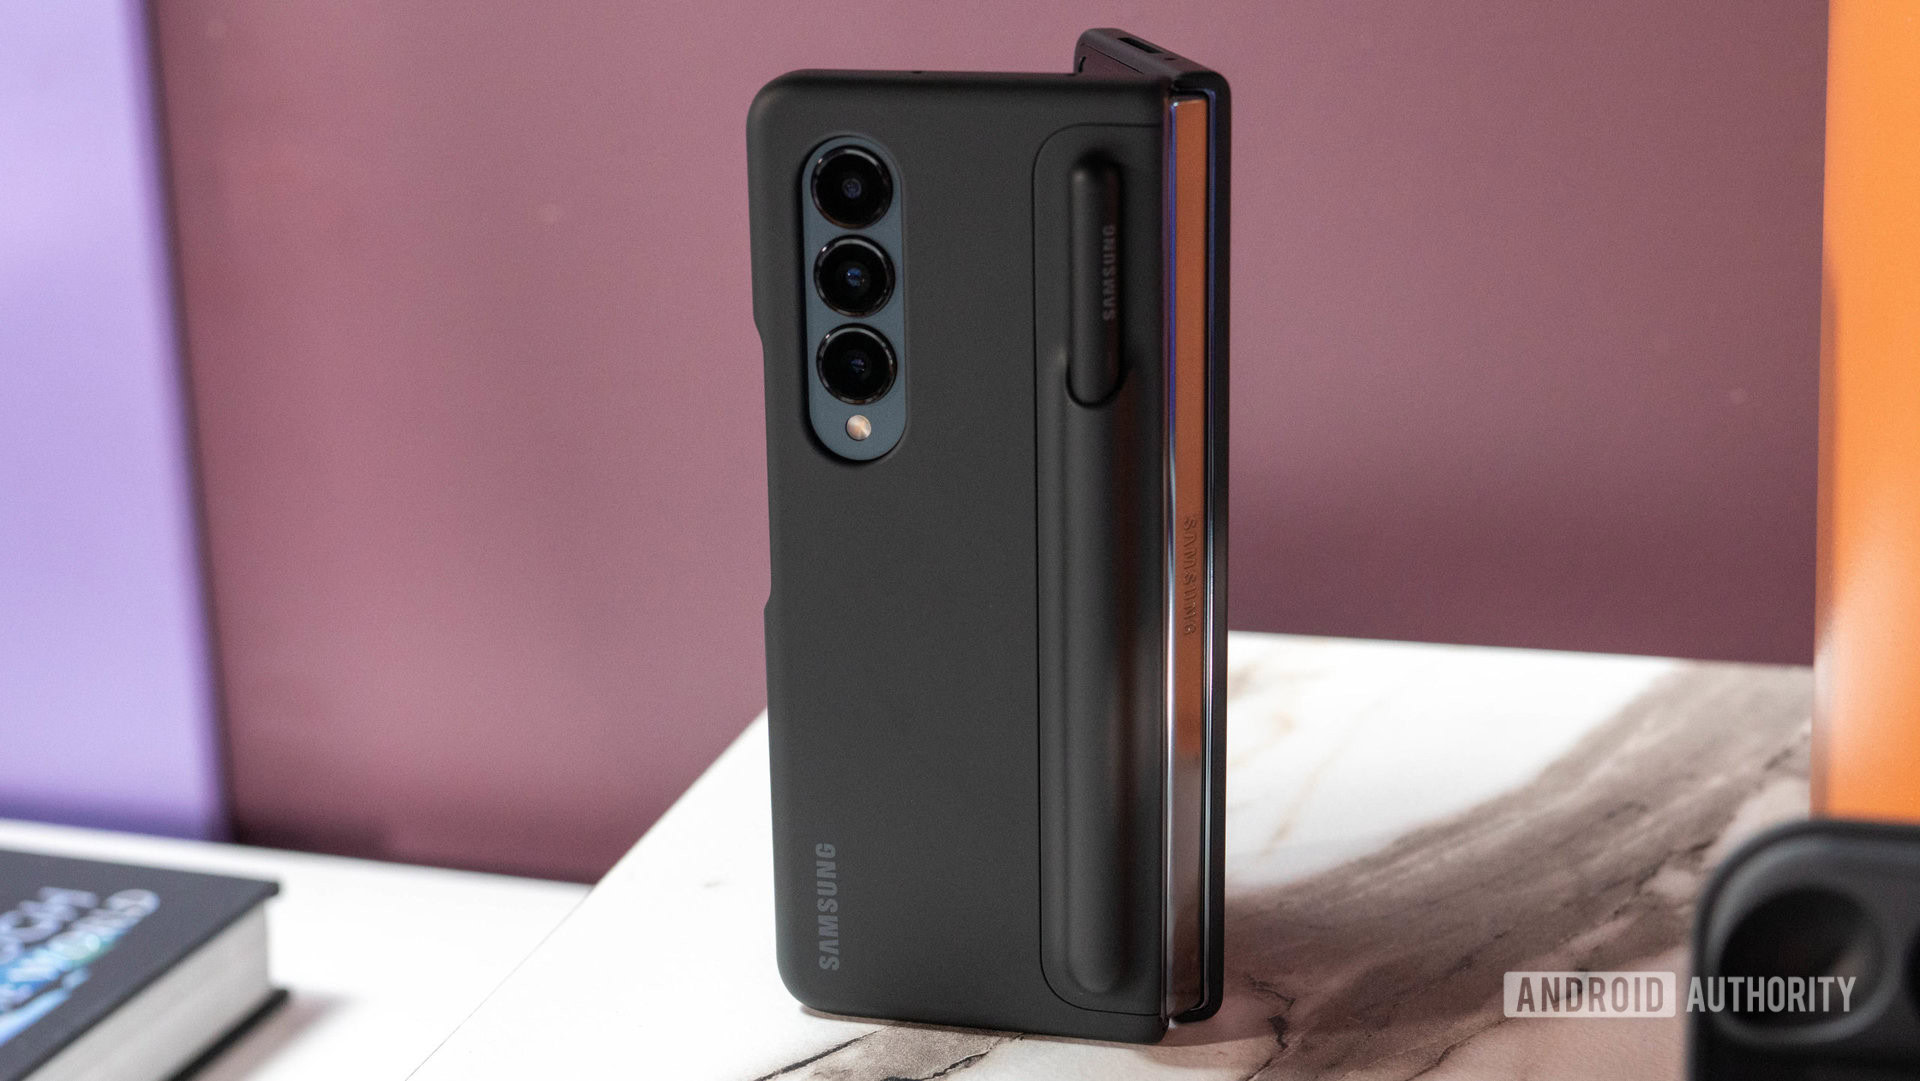 Verslinden Afdeling Proportioneel The best Samsung Galaxy Z Fold 4 cases you can buy - Android Authority